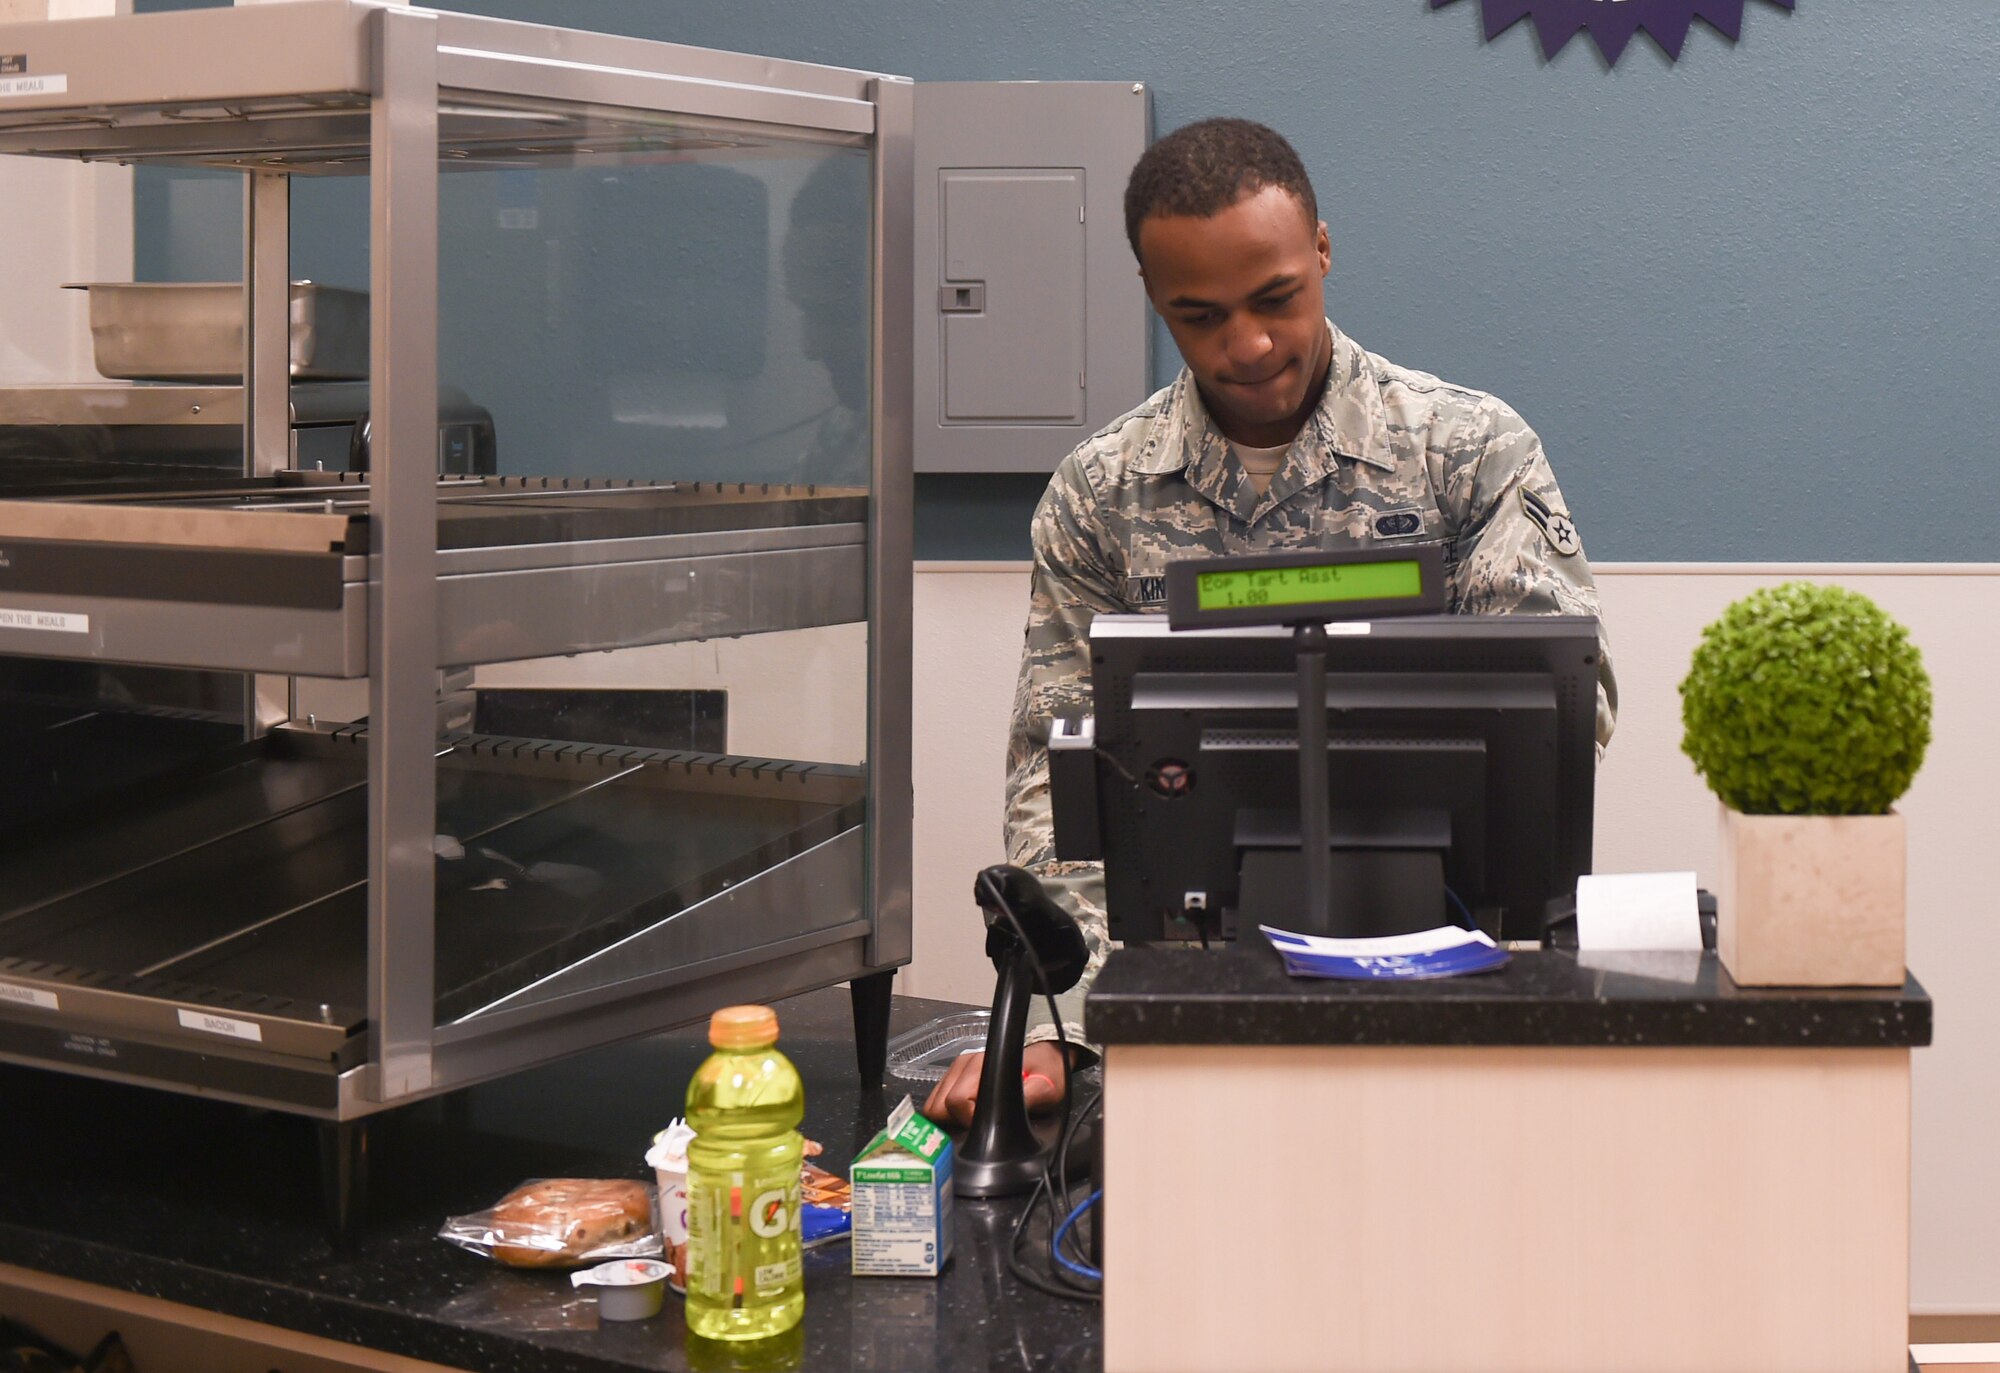 U.S. Air Force Airman 1st Class Malik King, 7th Force Support Squadron food service apprentice, processes a transaction at The Lift at Dyess Air Force Base, Texas, Feb. 8, 2017. The Lift is an extension of the Longhorn Dining Facility that provides hot meals and snacks to Airmen and aircrew on the flightline. Personnel can either pay with cash, debit or with their meal cards. (U.S. Air Force photo by Airman 1st Class Quay Drawdy)